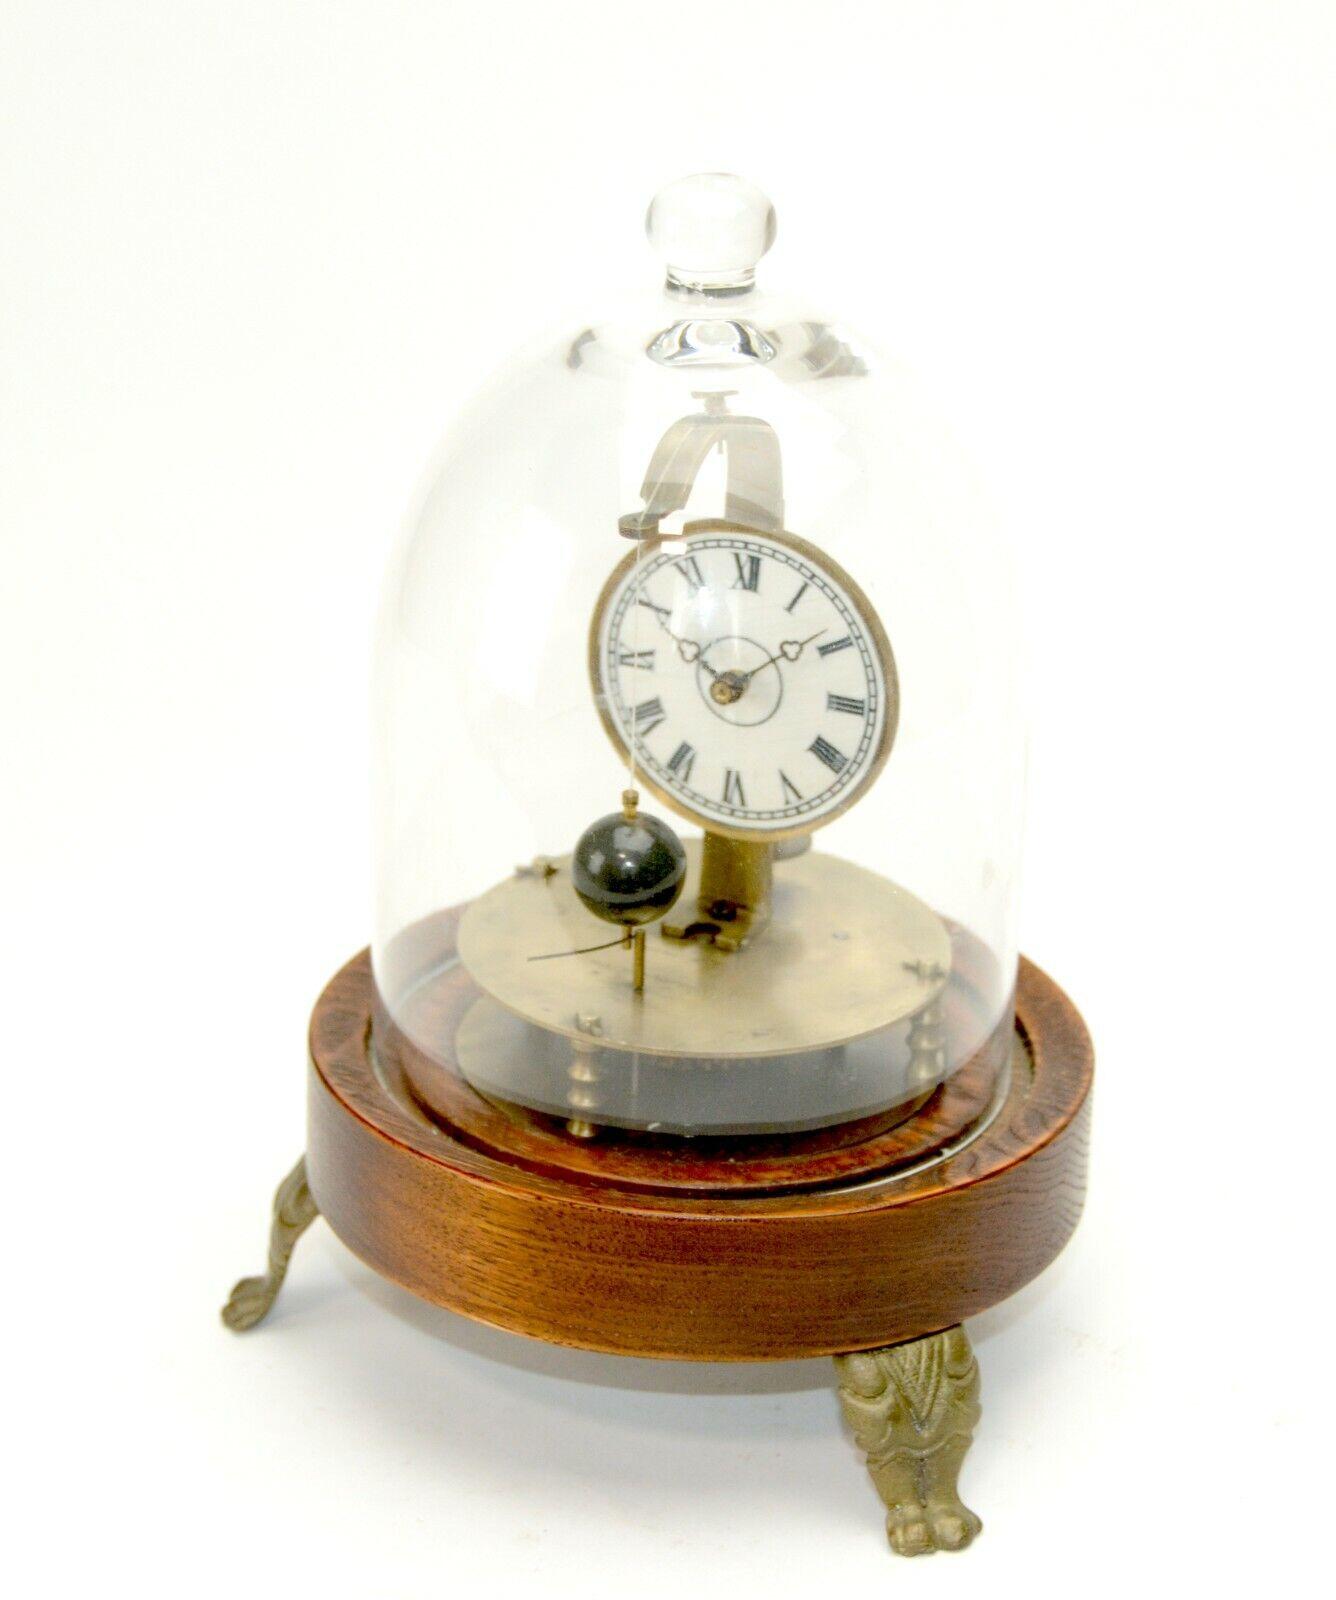 Mystery Briggs Rotary glass dome flying ball clock.

We are presenting an excellent 